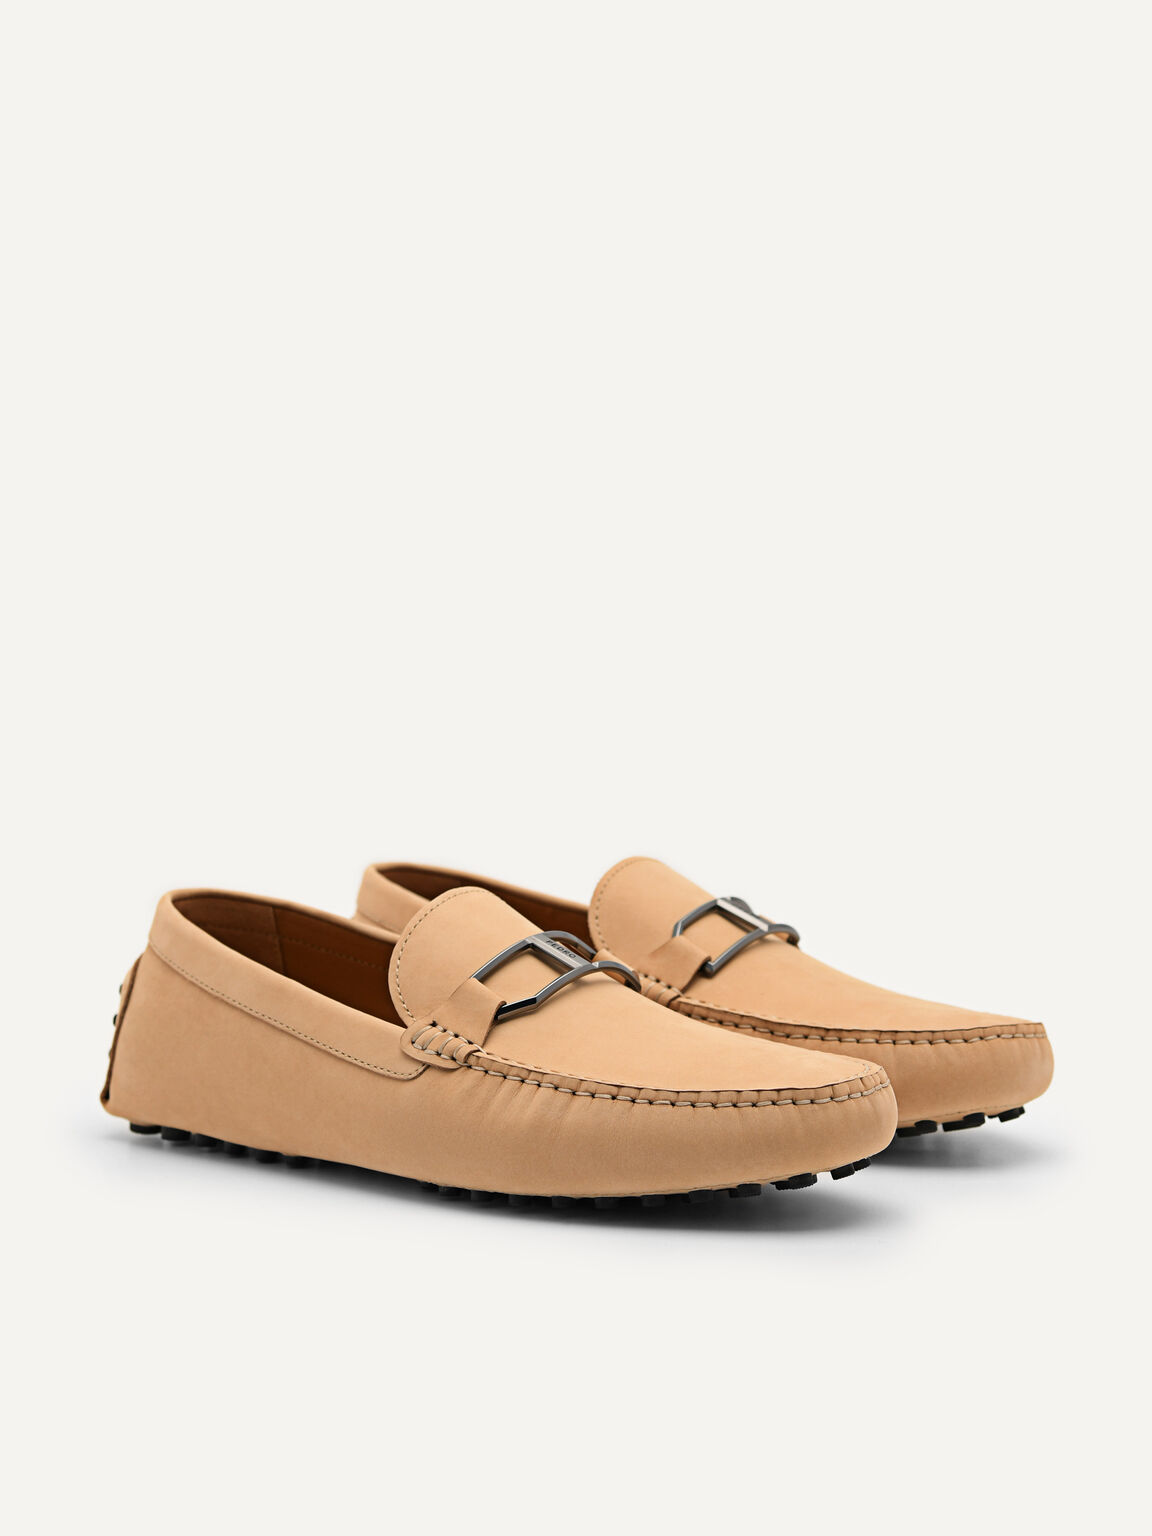 Leather Buckle Moccasins, Sand